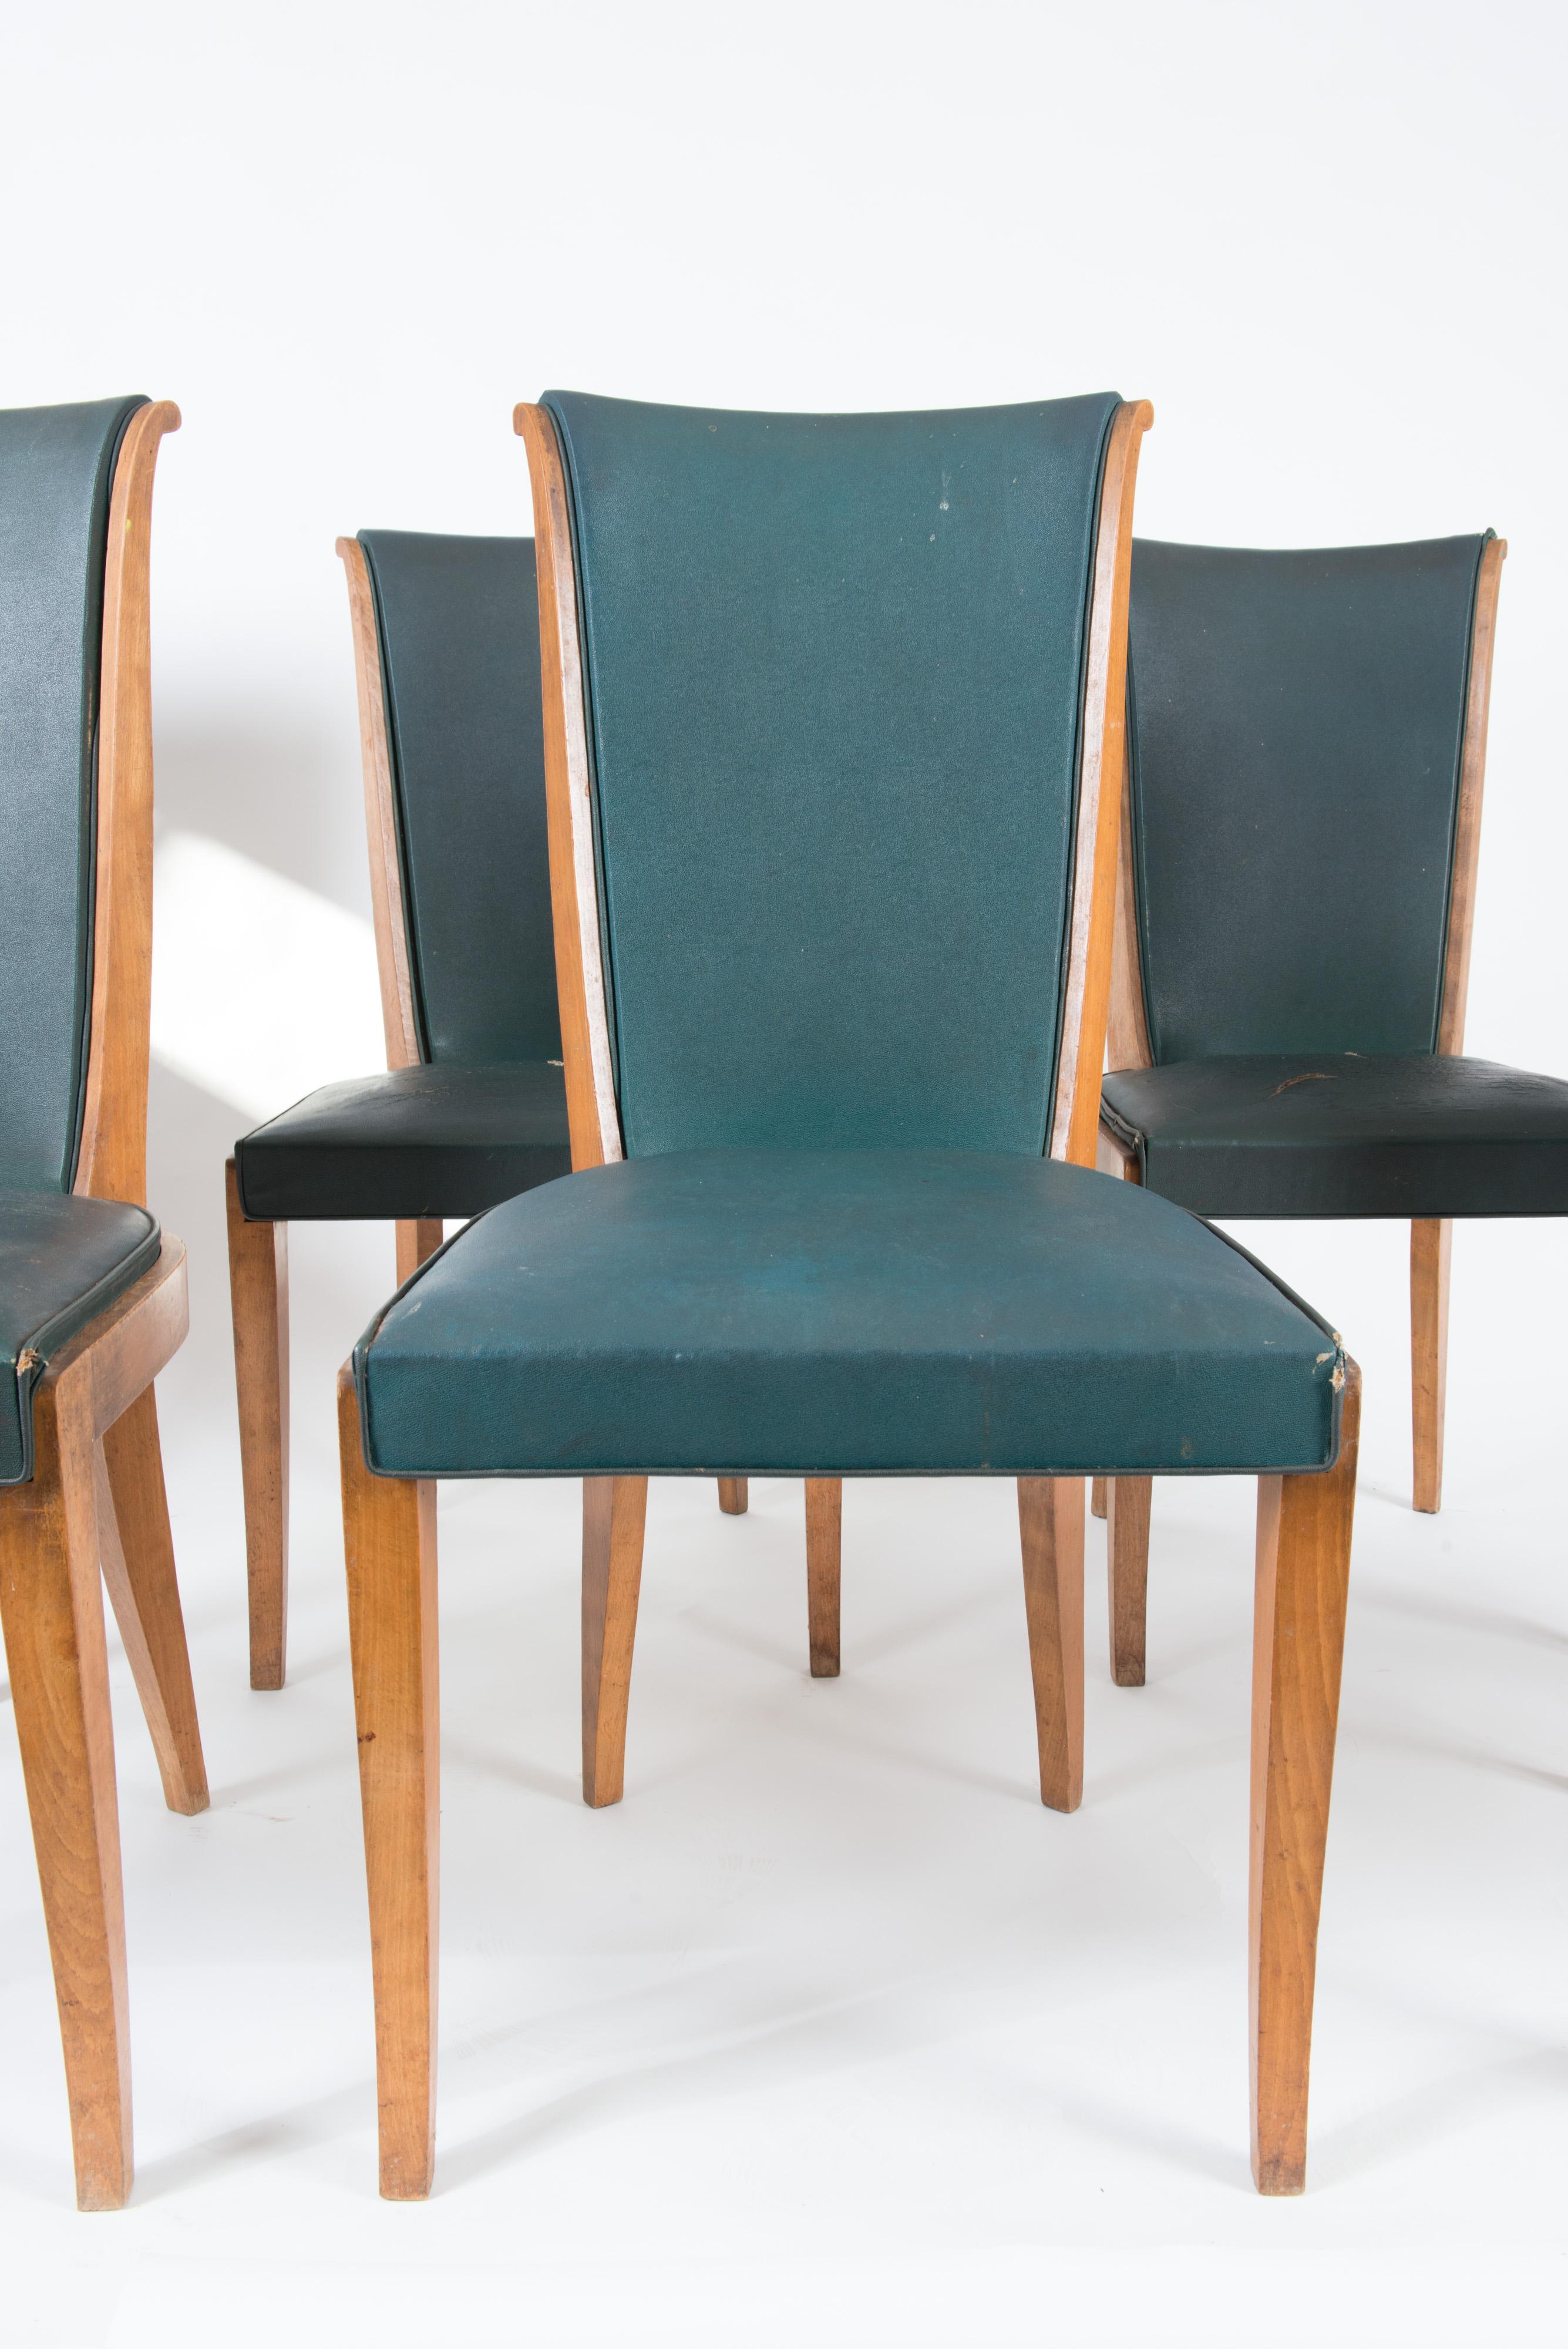 Set of six French midcentury light wood dining chairs. Frames are solid and sturdy. Original green vinyl upholstery. Ready for re-upholstery.